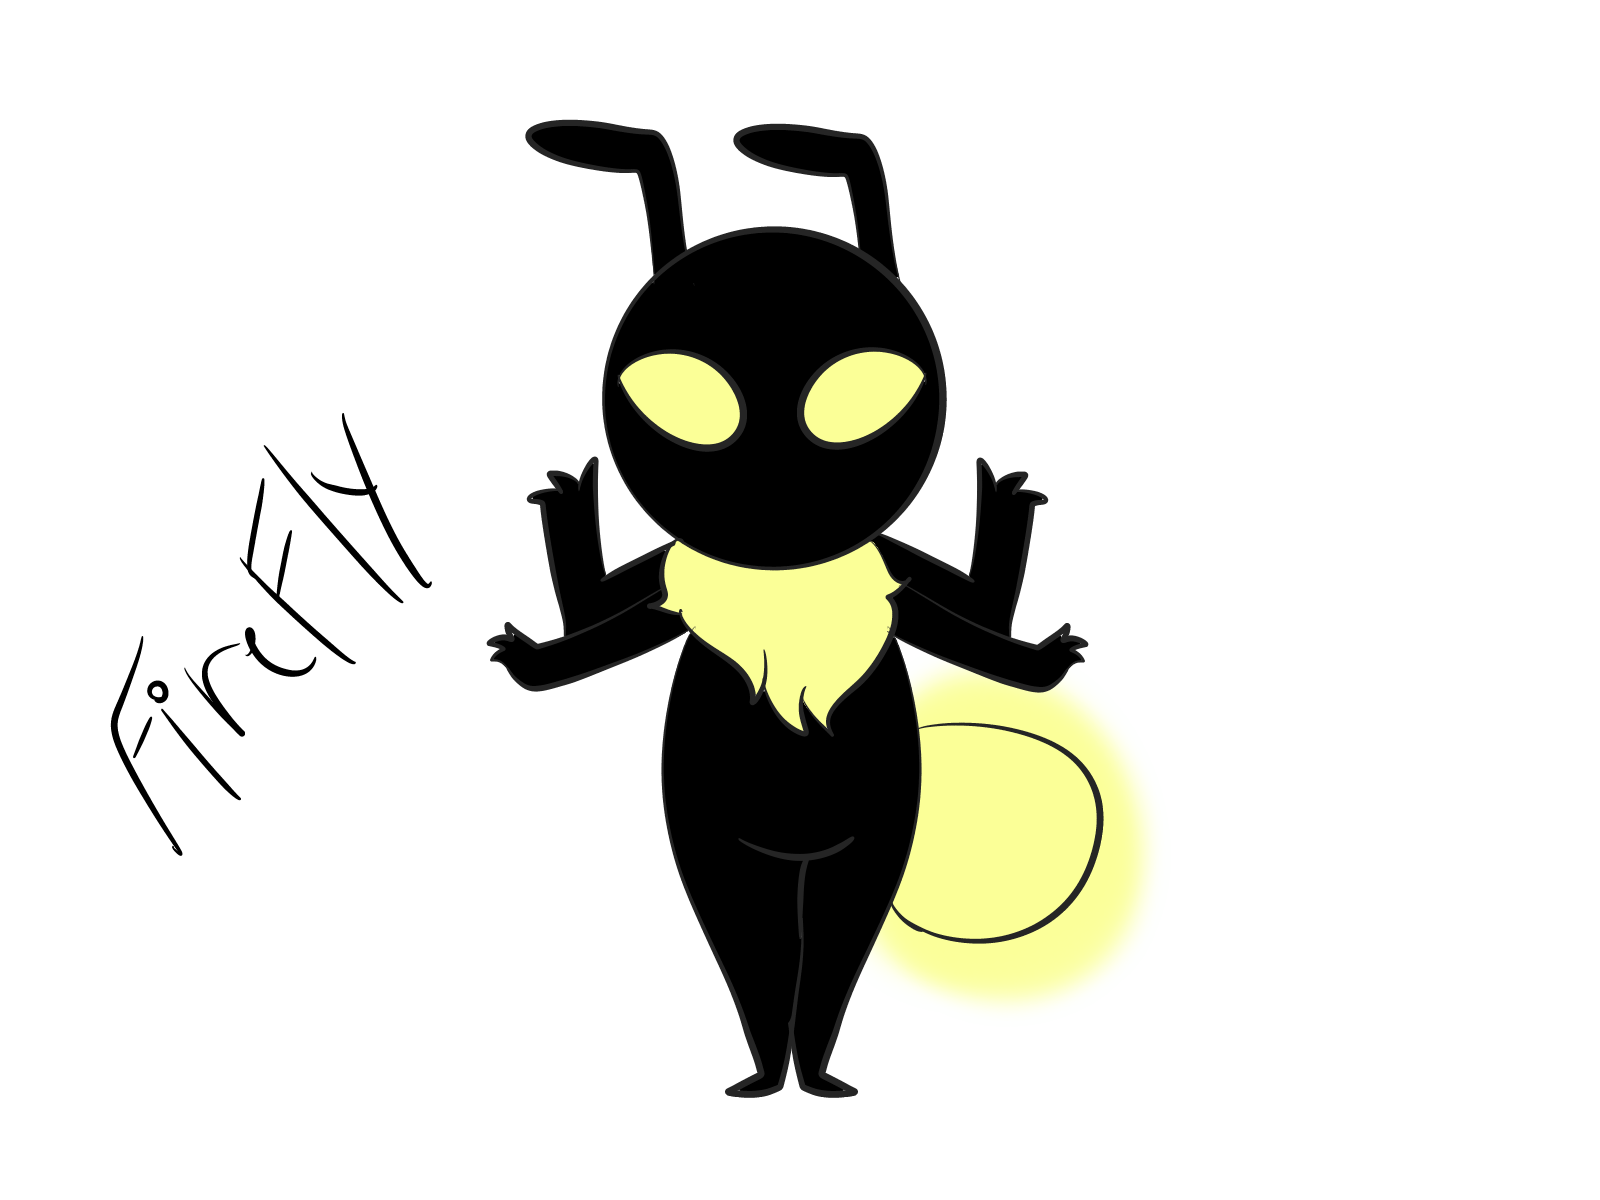 Firefly GRATUIT PNG HQ Image